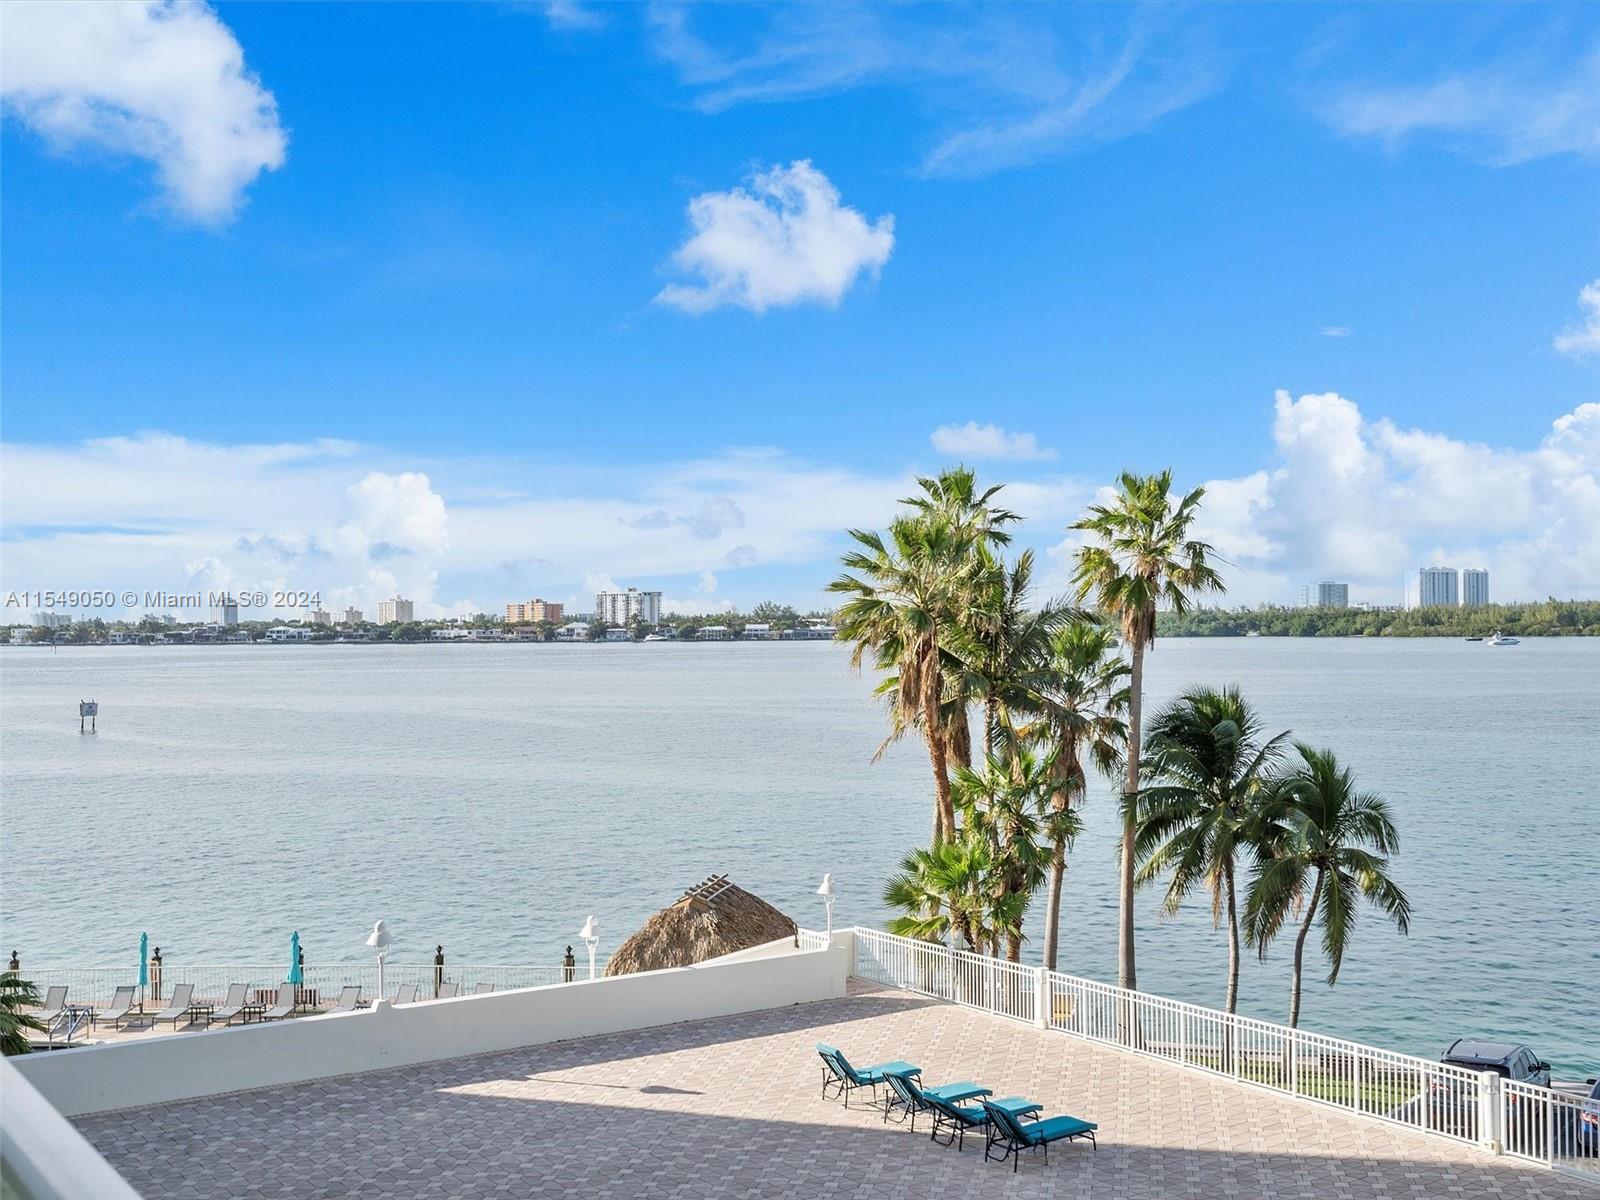 Waterfront unit available at Island Pointe Condominium. This Unit has 1 bedroom with 1.5
bathrooms facing north-northwest towards Biscayne Bay. Large galley kitchen with granite
countertops and lots of cabinet space. Large walking closet. Spacious living room and dining room.
Access to balcony from the living room. Building has lots of amenities: Heated pool, large gym,
media room, tiki huts & gas grills, 24-hour front desk attendant, and on-site management. Gated
property. Premium cable, high-speed internet, Reserves are included in the HOA. Cooling tower &
chiller system for air conditioning, electric bills are lower. Walk to A+ school. Unit comes with 1
assigned parking space.